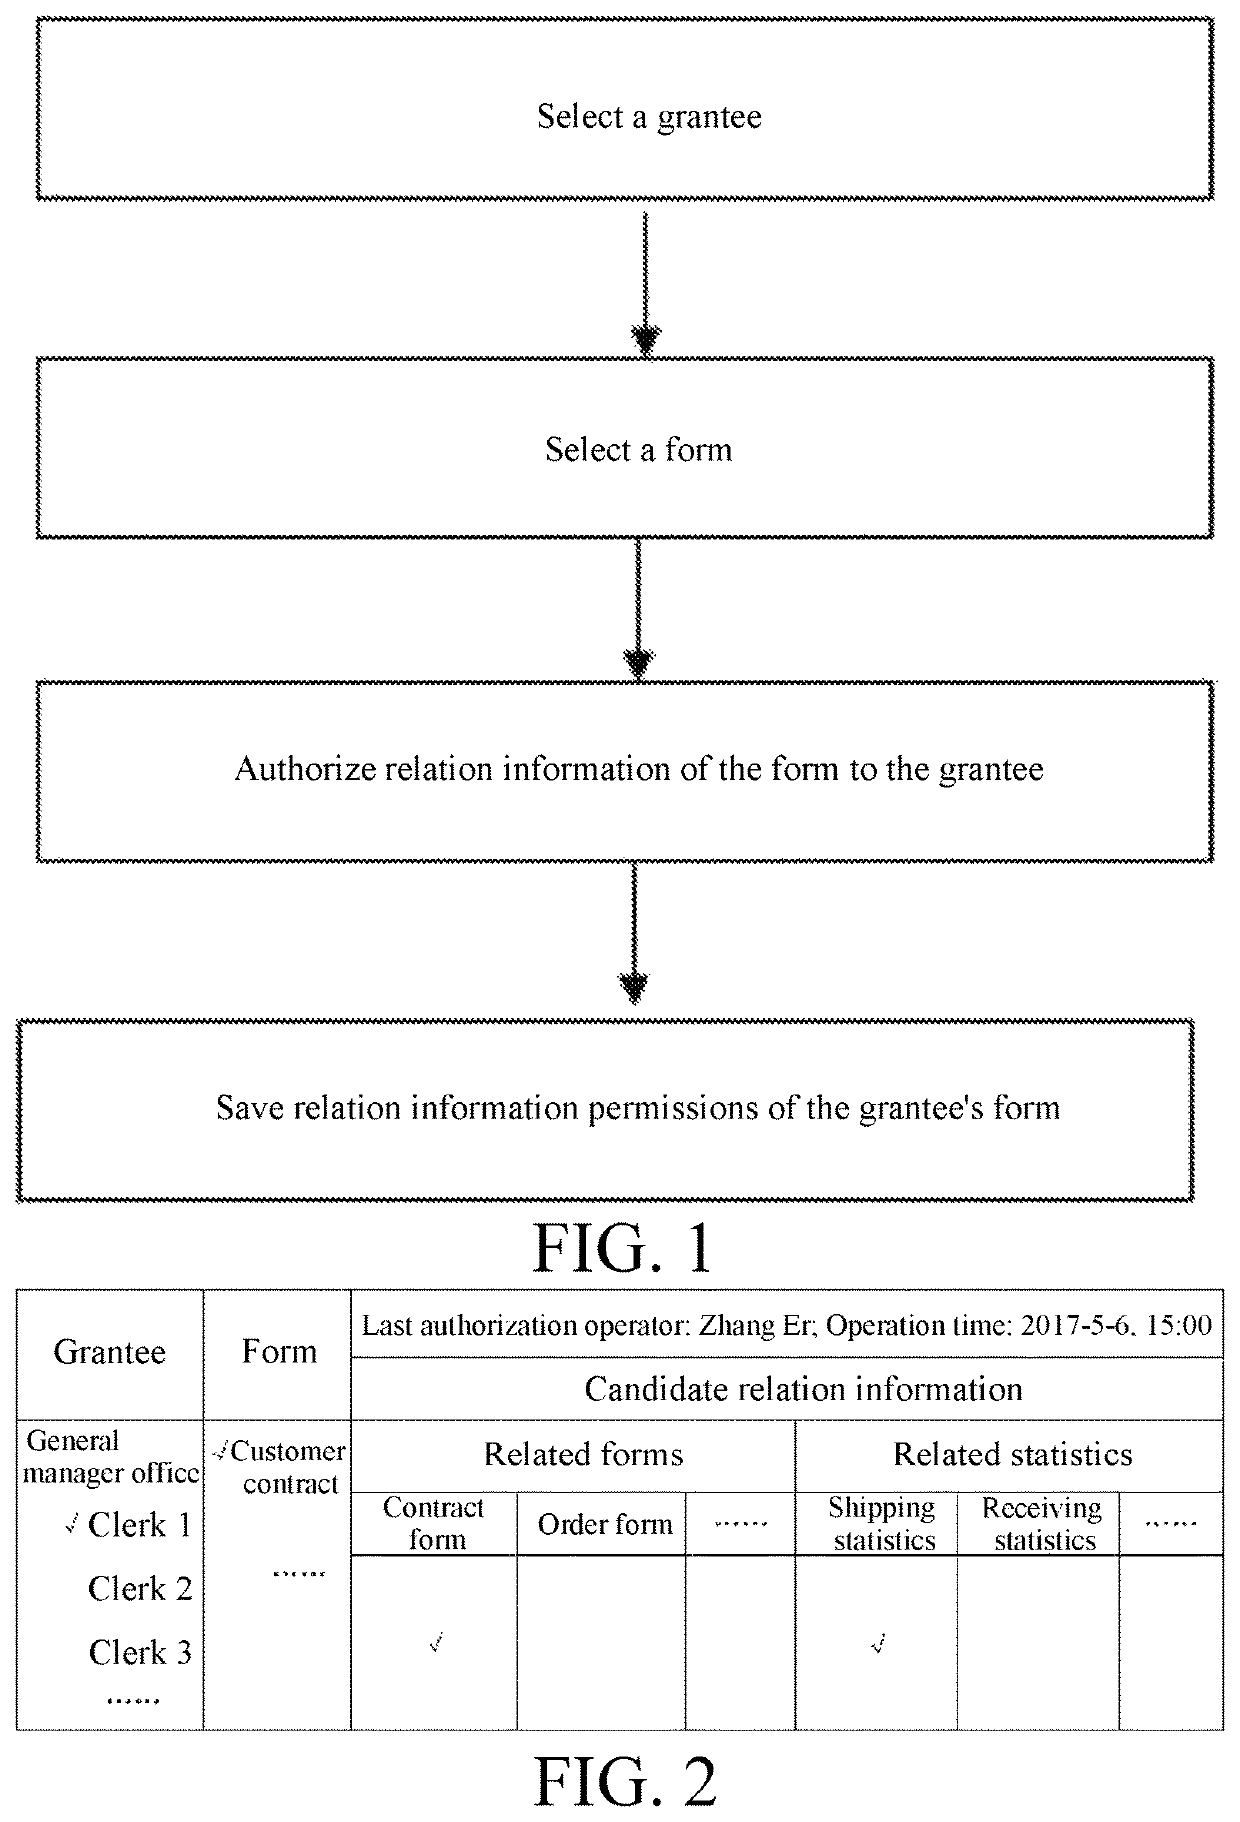 Authorization method for form related information